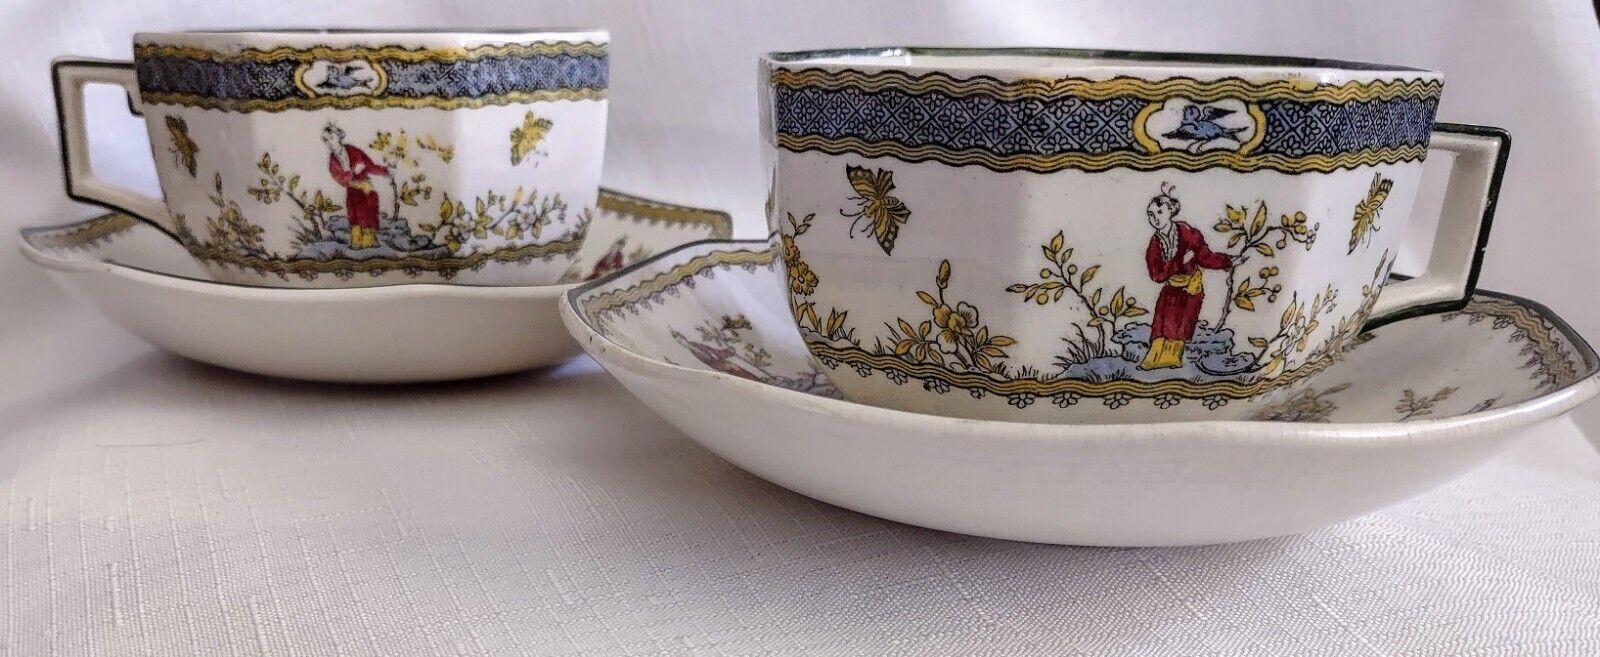 2 Vintage 1925 Royal Doulton Mandarin Teacups With Saucer Discontinued Pattern